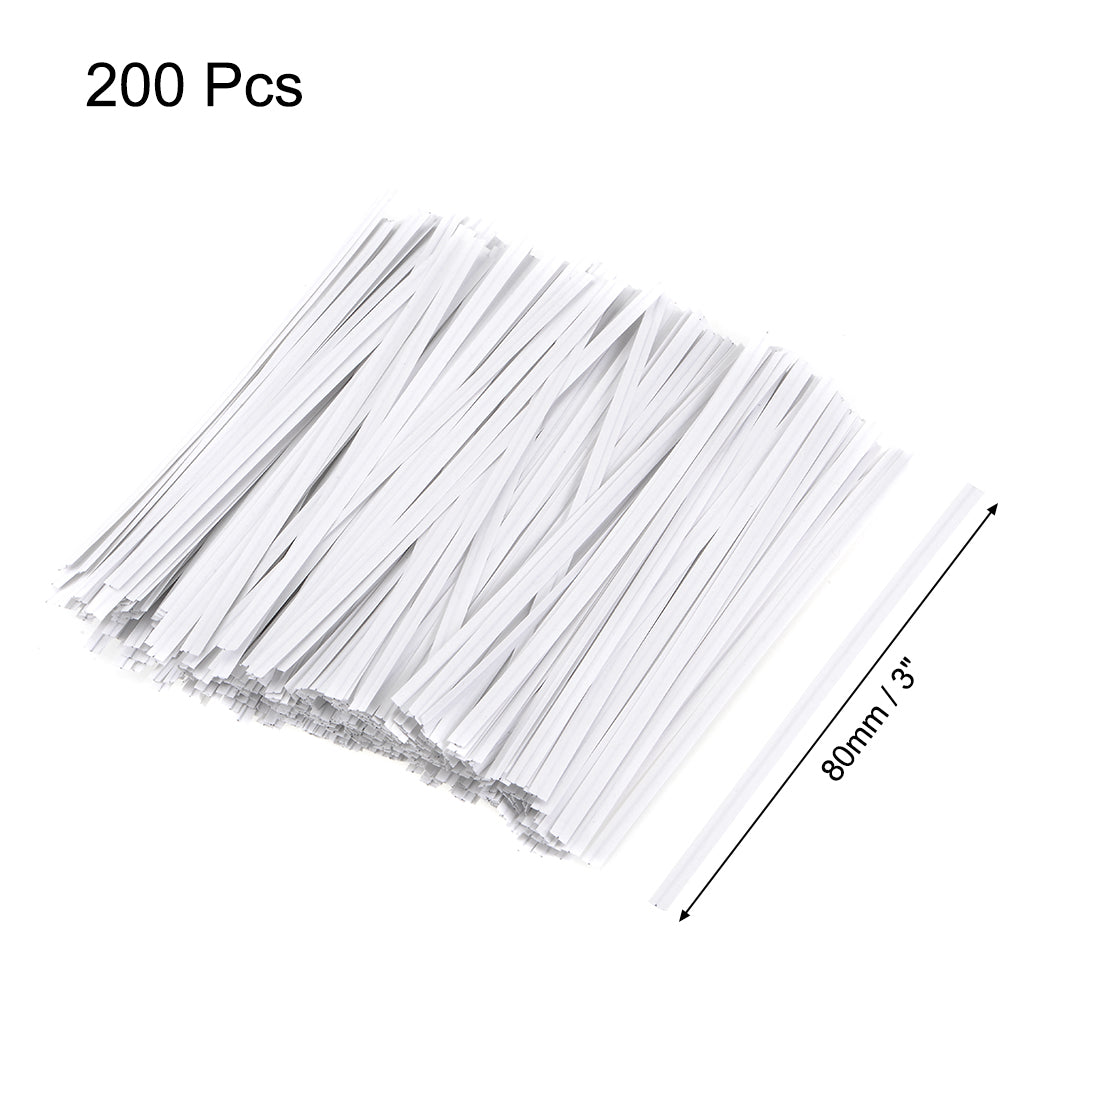 uxcell Uxcell Long Strong Twist Ties 3.15 Inches Quality  Closure Tie for Tying Gift Bags Art Craft Ties Manage Cords White 200pcs